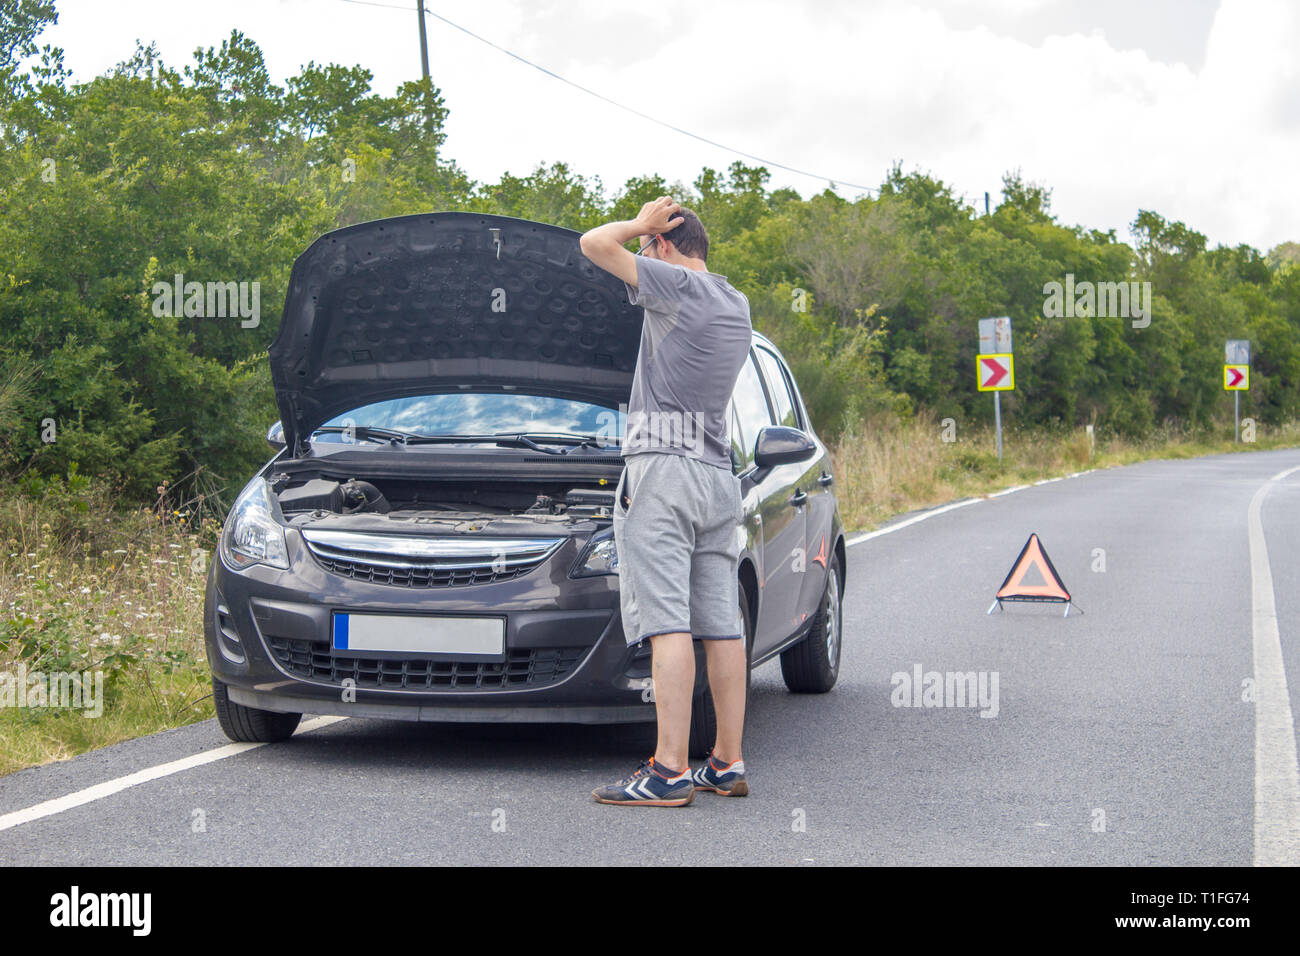 Car malfunction on countryside. Car waiting for help on the road. Car breakdown. Man with car breakdown. Waiting for roadside assistance Stock Photo